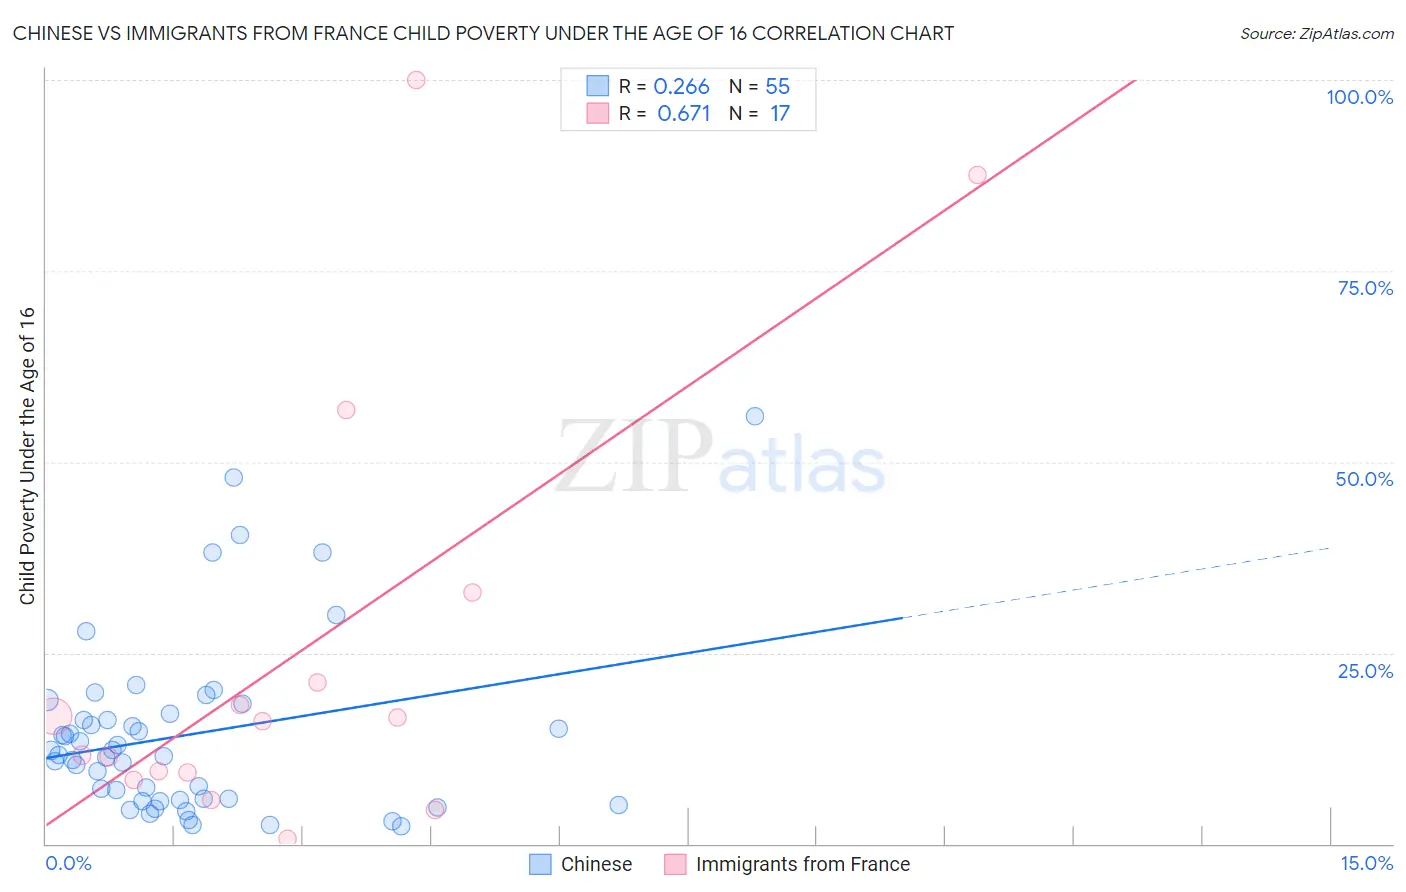 Chinese vs Immigrants from France Child Poverty Under the Age of 16